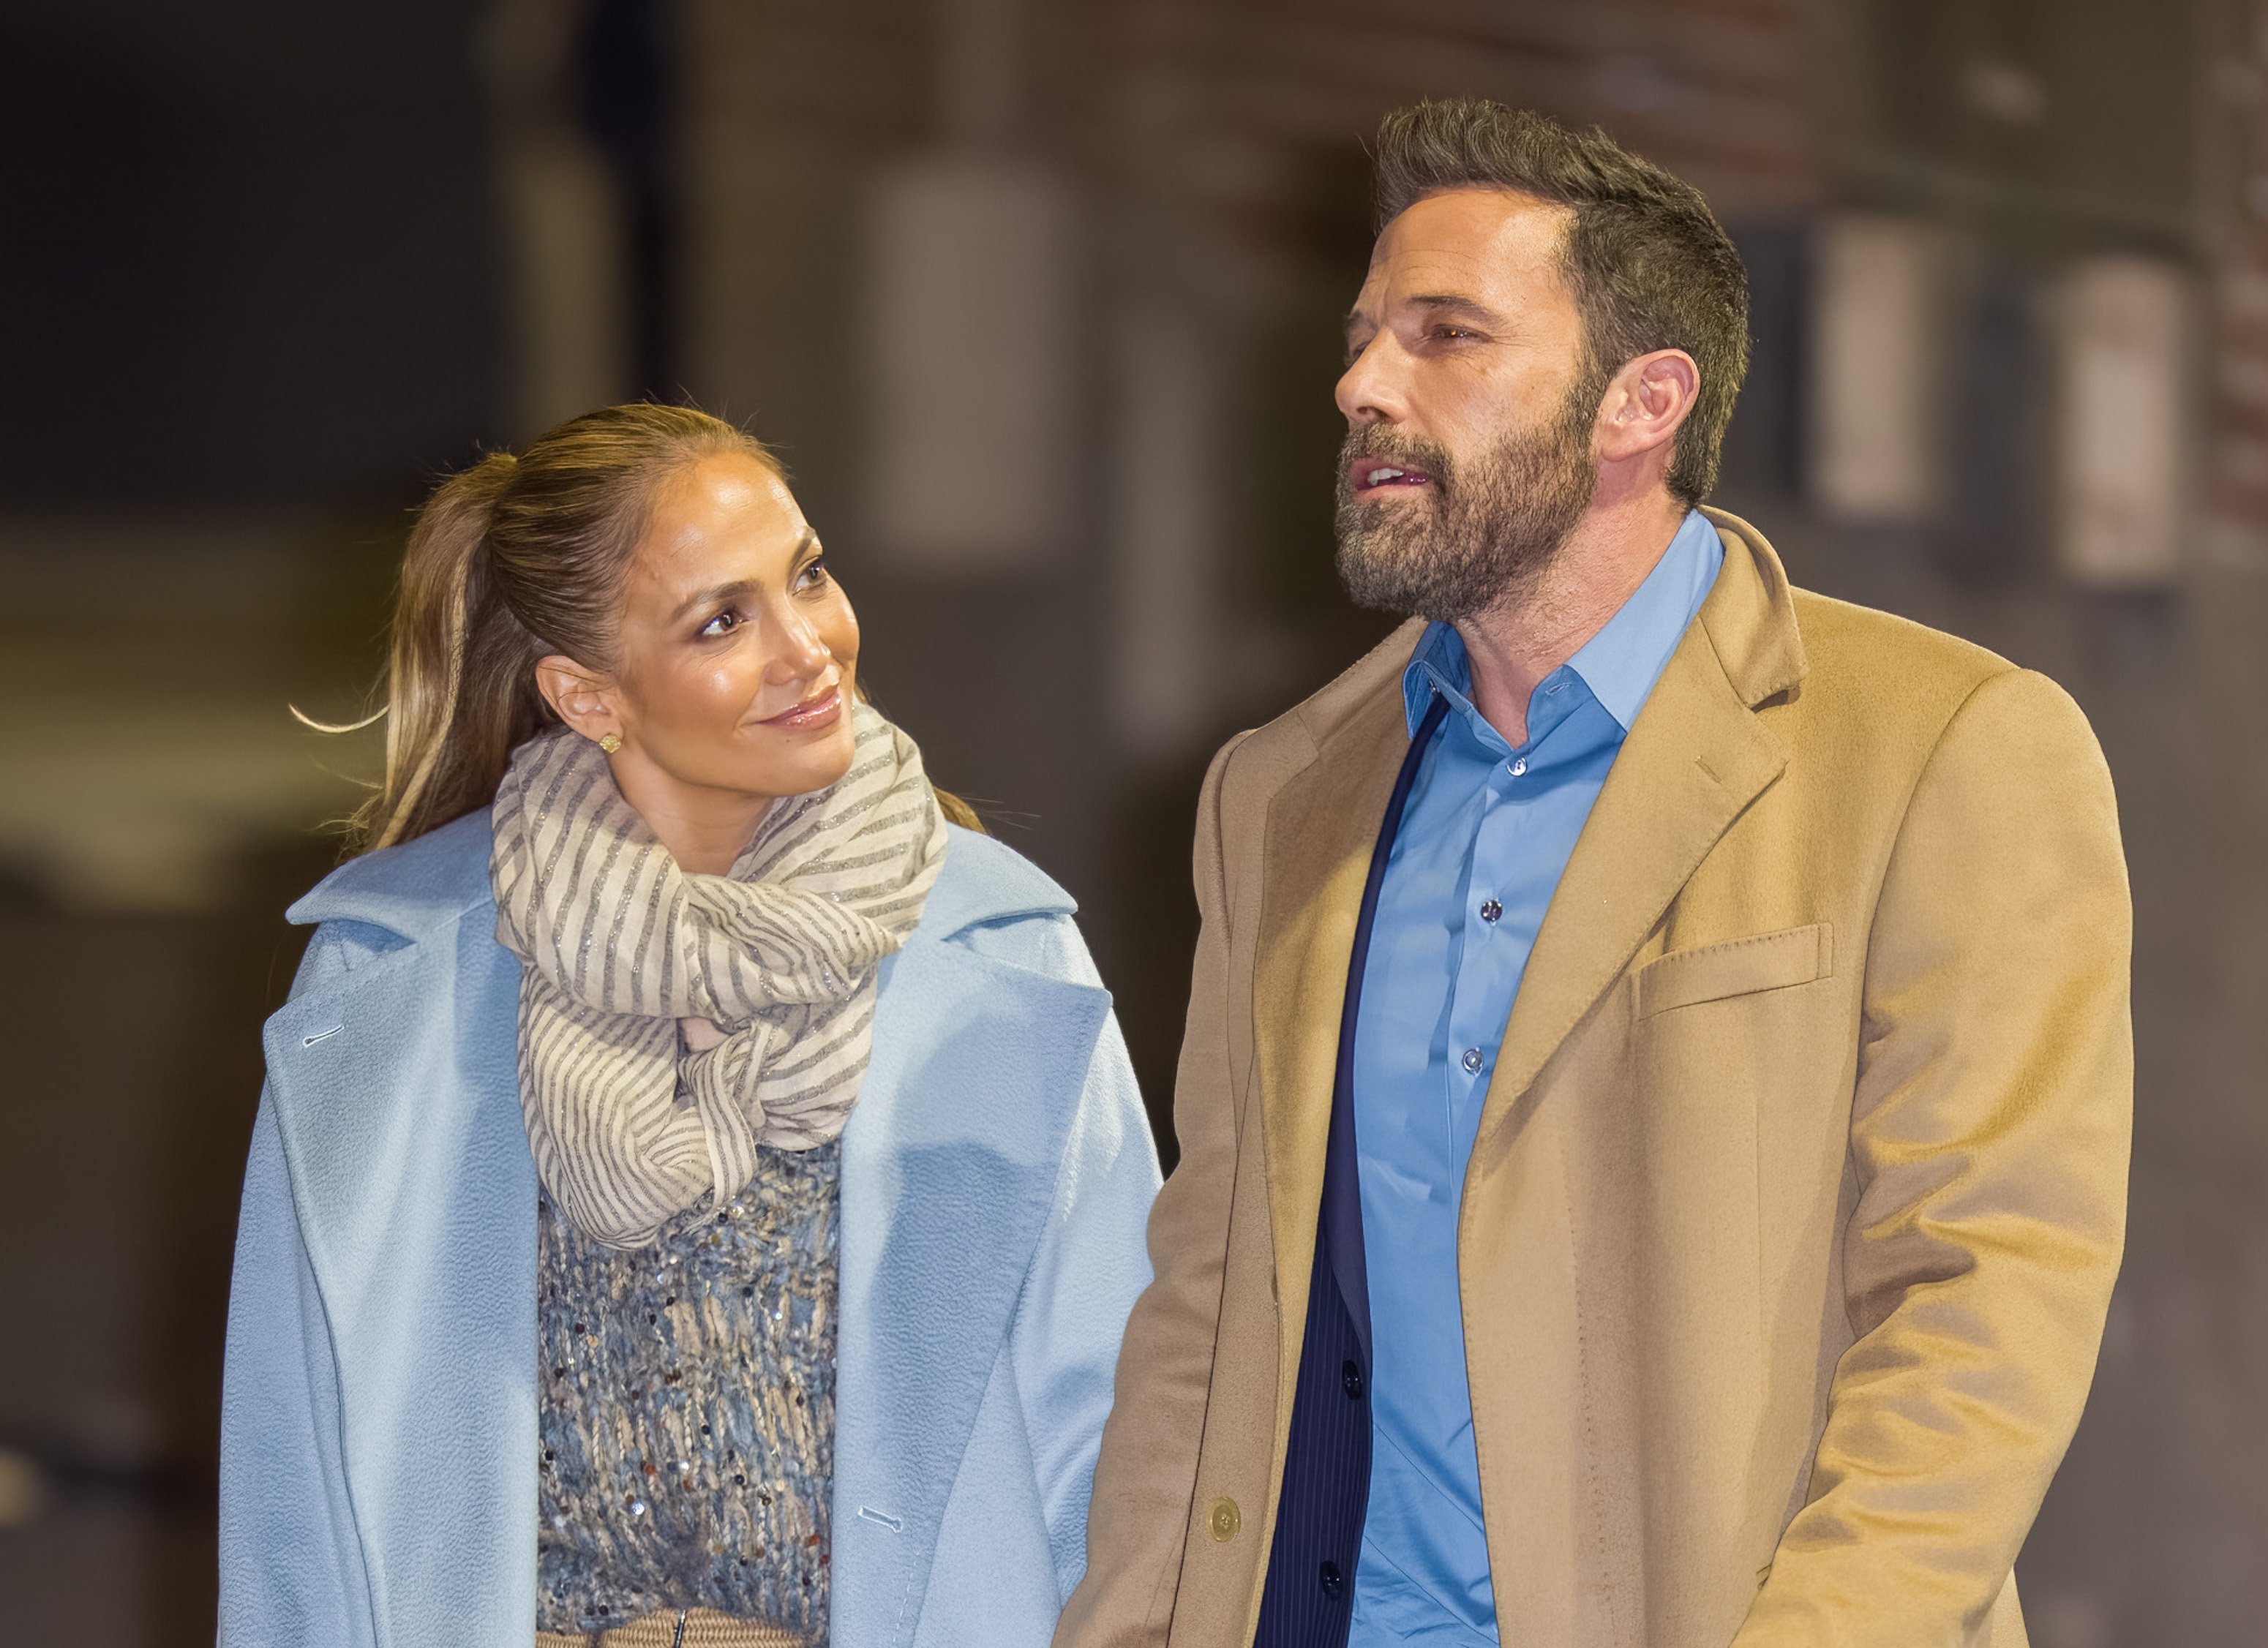 Jennifer Lopez and Ben Affleck are seen at "Jimmy Kimmel Live" on December 15, 2021 in Los Angeles, California | Source: Getty Images